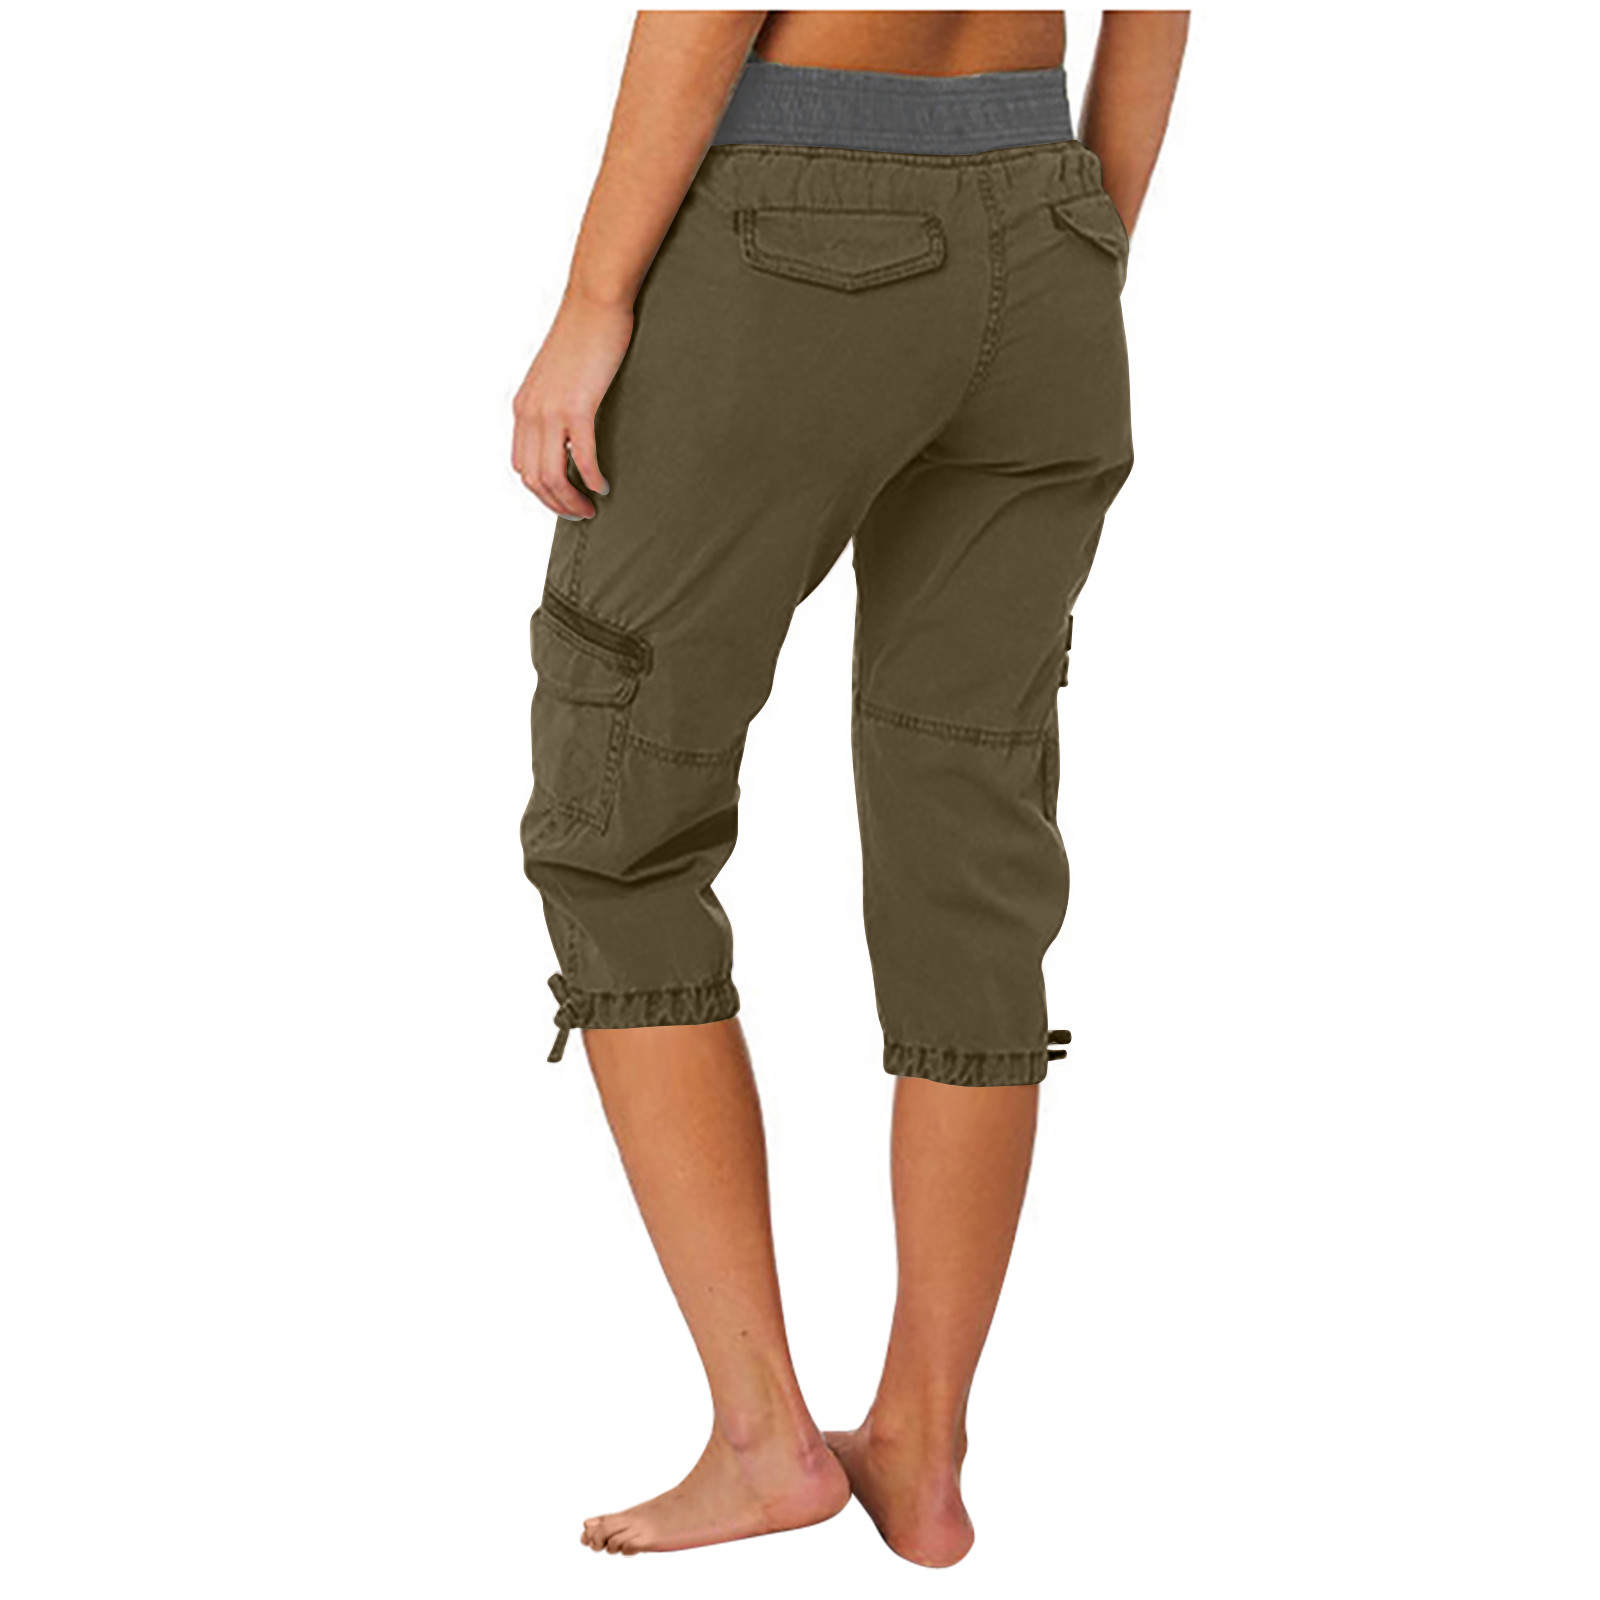 Dyegold Capri Cargo Pants For Women High Waist Casual Loose Fit Work ...